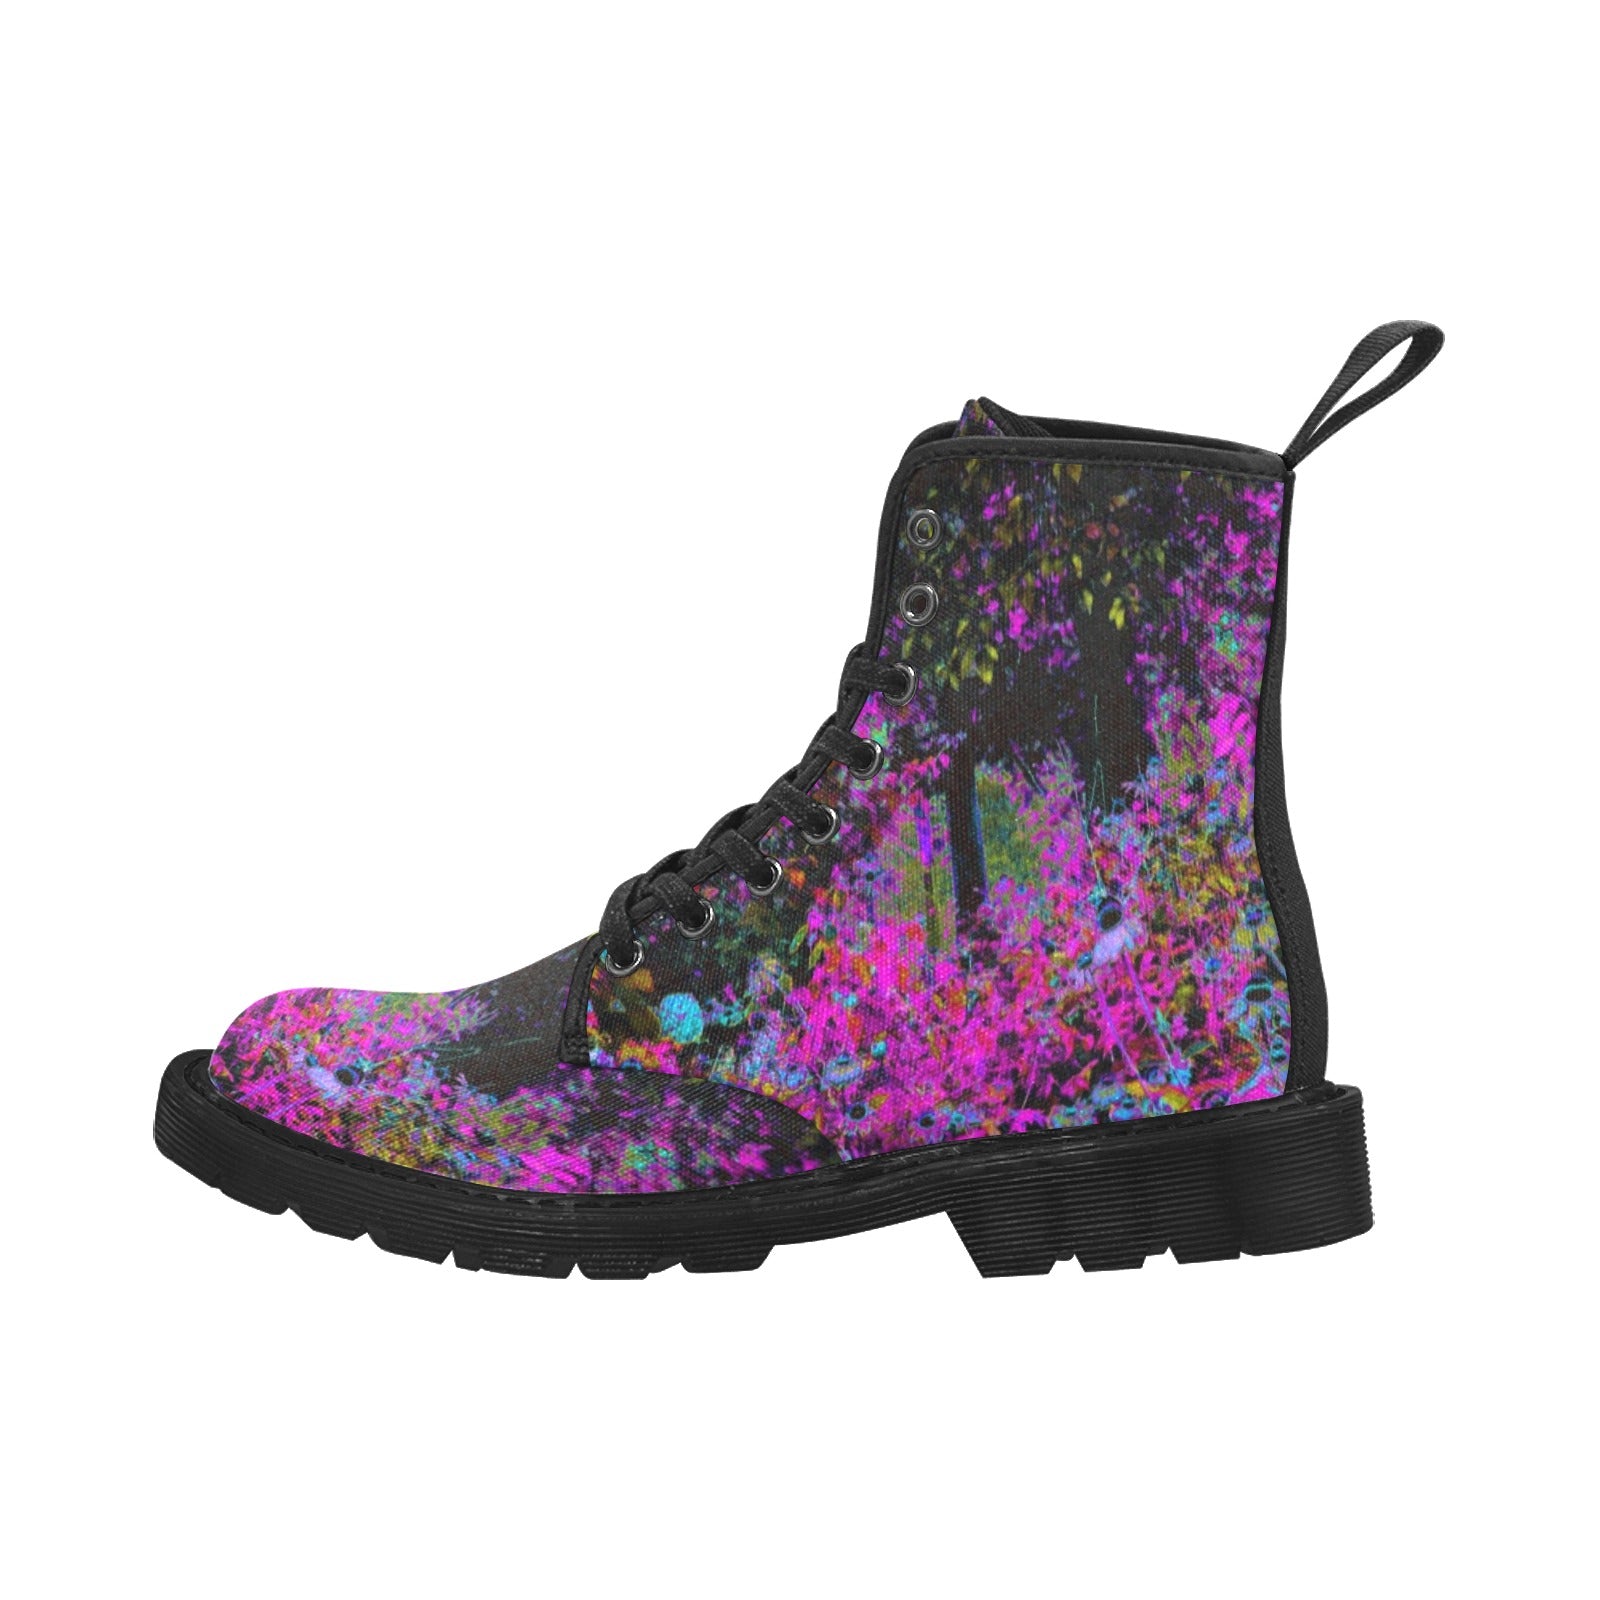 Boots for Women, Psychedelic Hot Pink and Black Garden Sunrise - Black